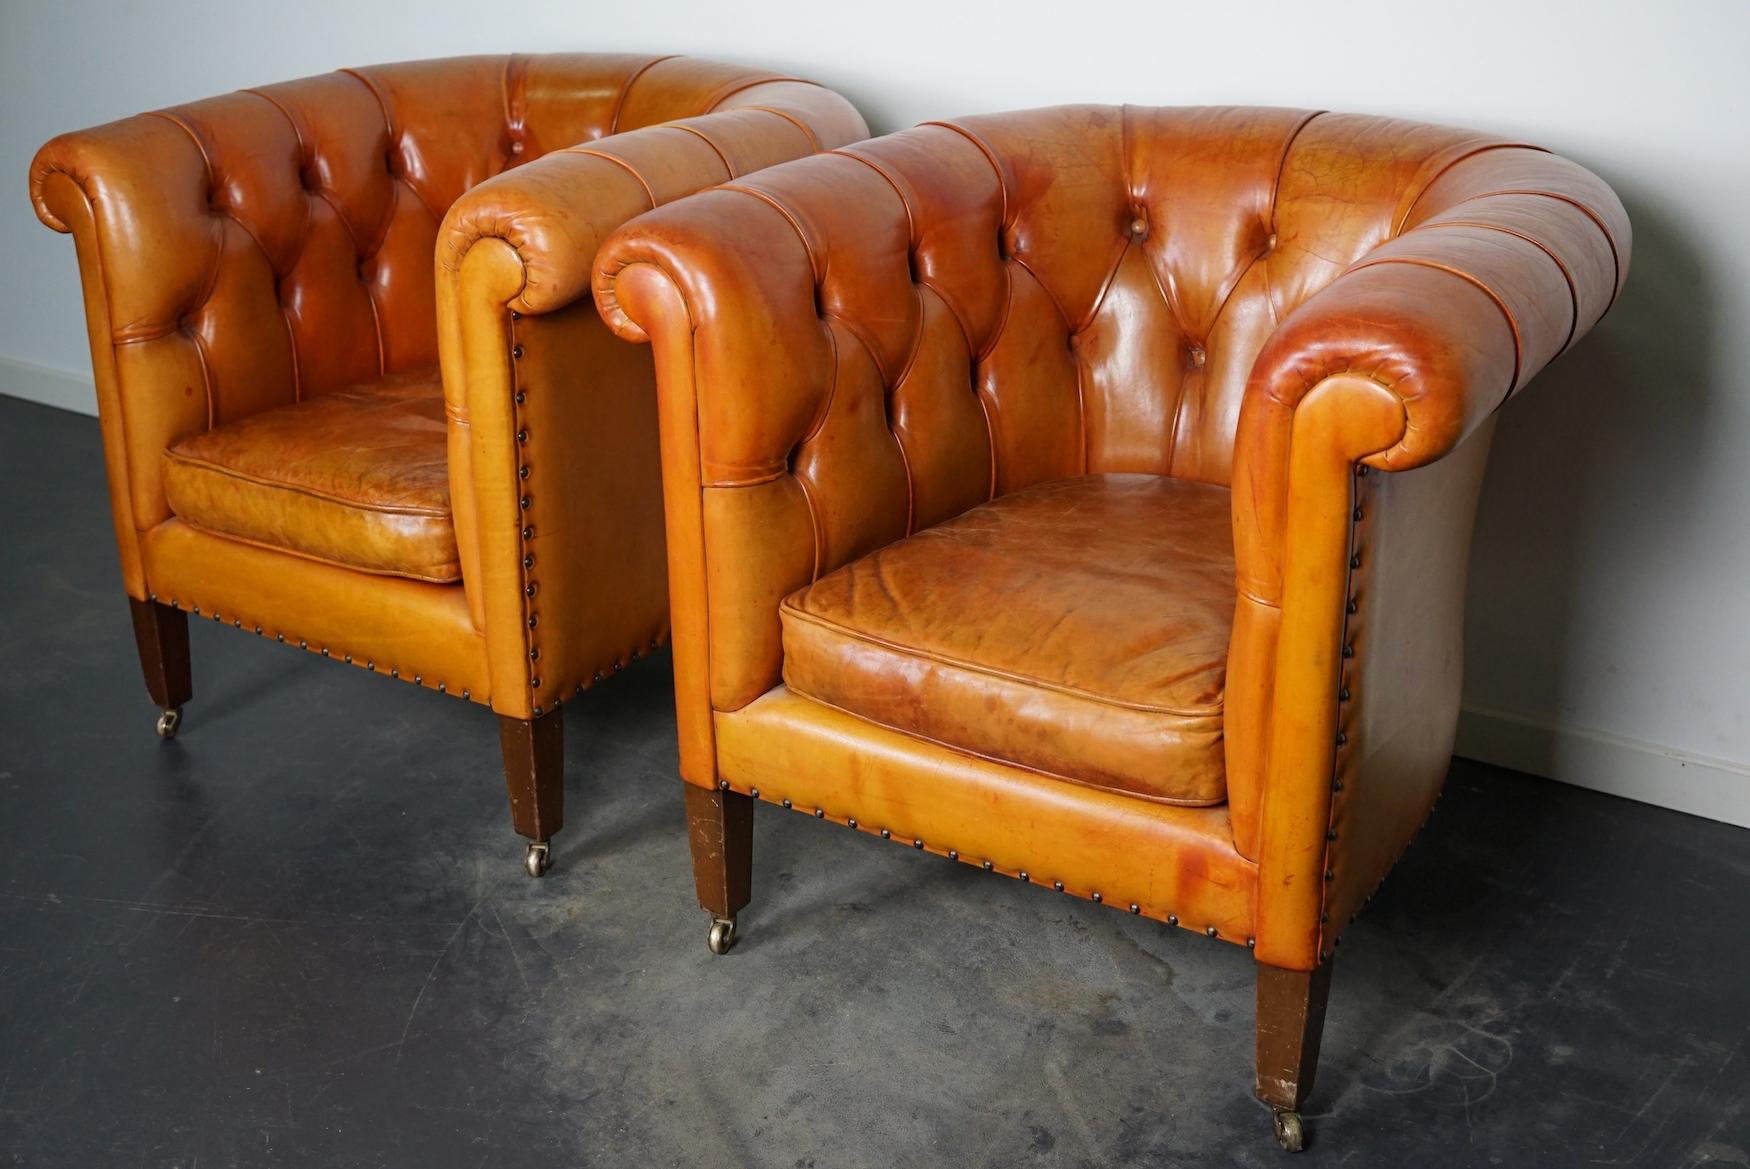 This pair of cognac-colored leather club chairs come from the Netherlands. They are upholstered with cognac-colored leather and feature metal rivets and wooden legs. The buttoned backs give this pair an exclusive look.